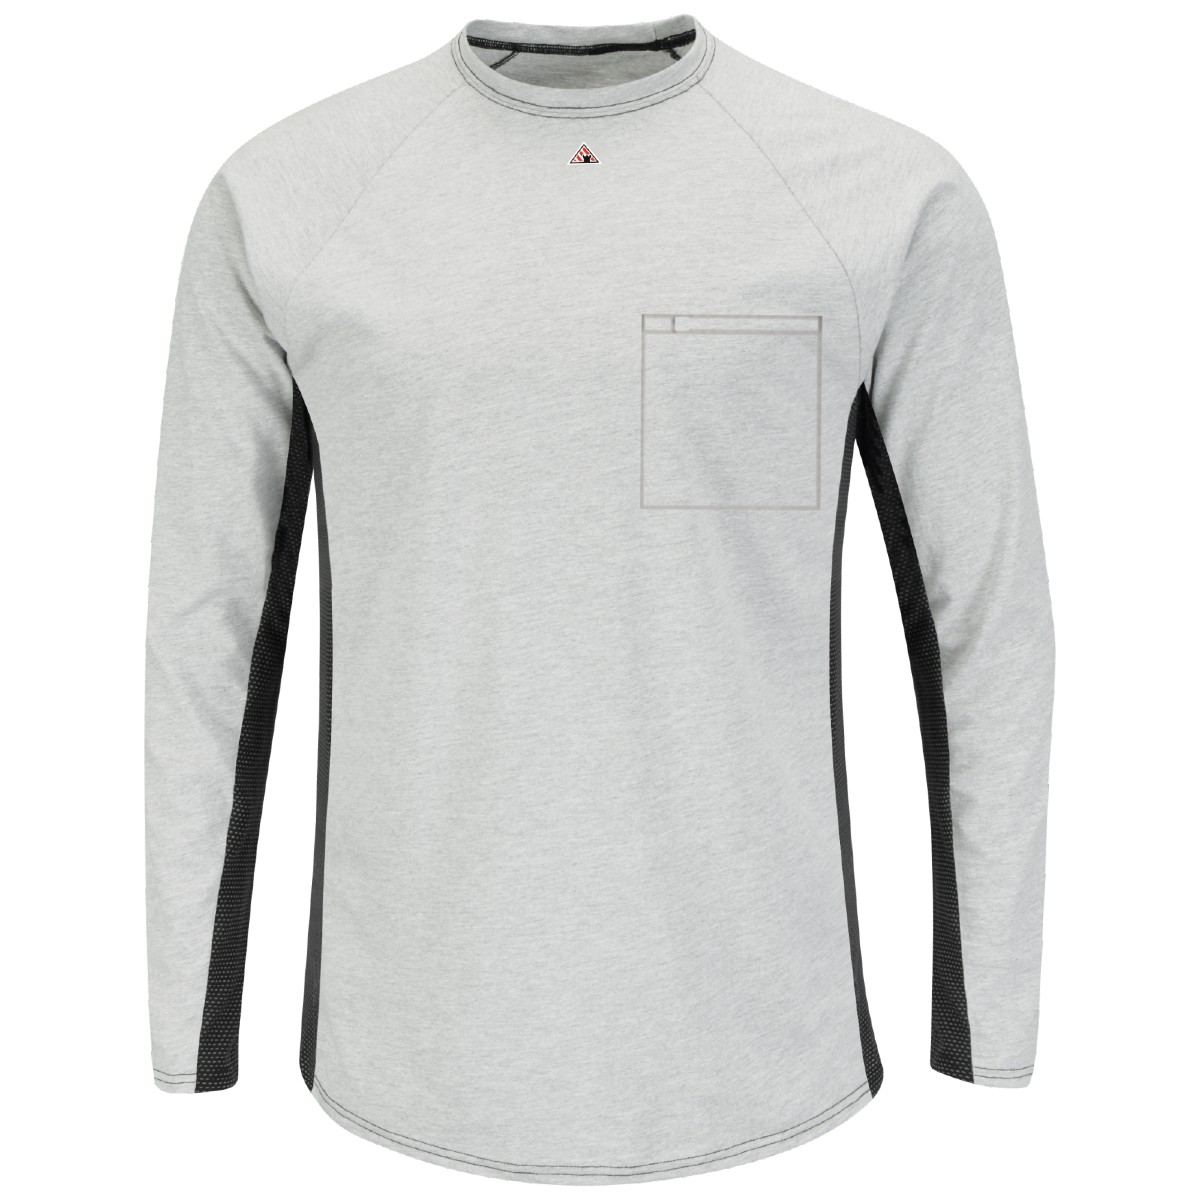 Bulwark FR Long Sleeve Base Layer With Concealed Chest Pocket in Gray